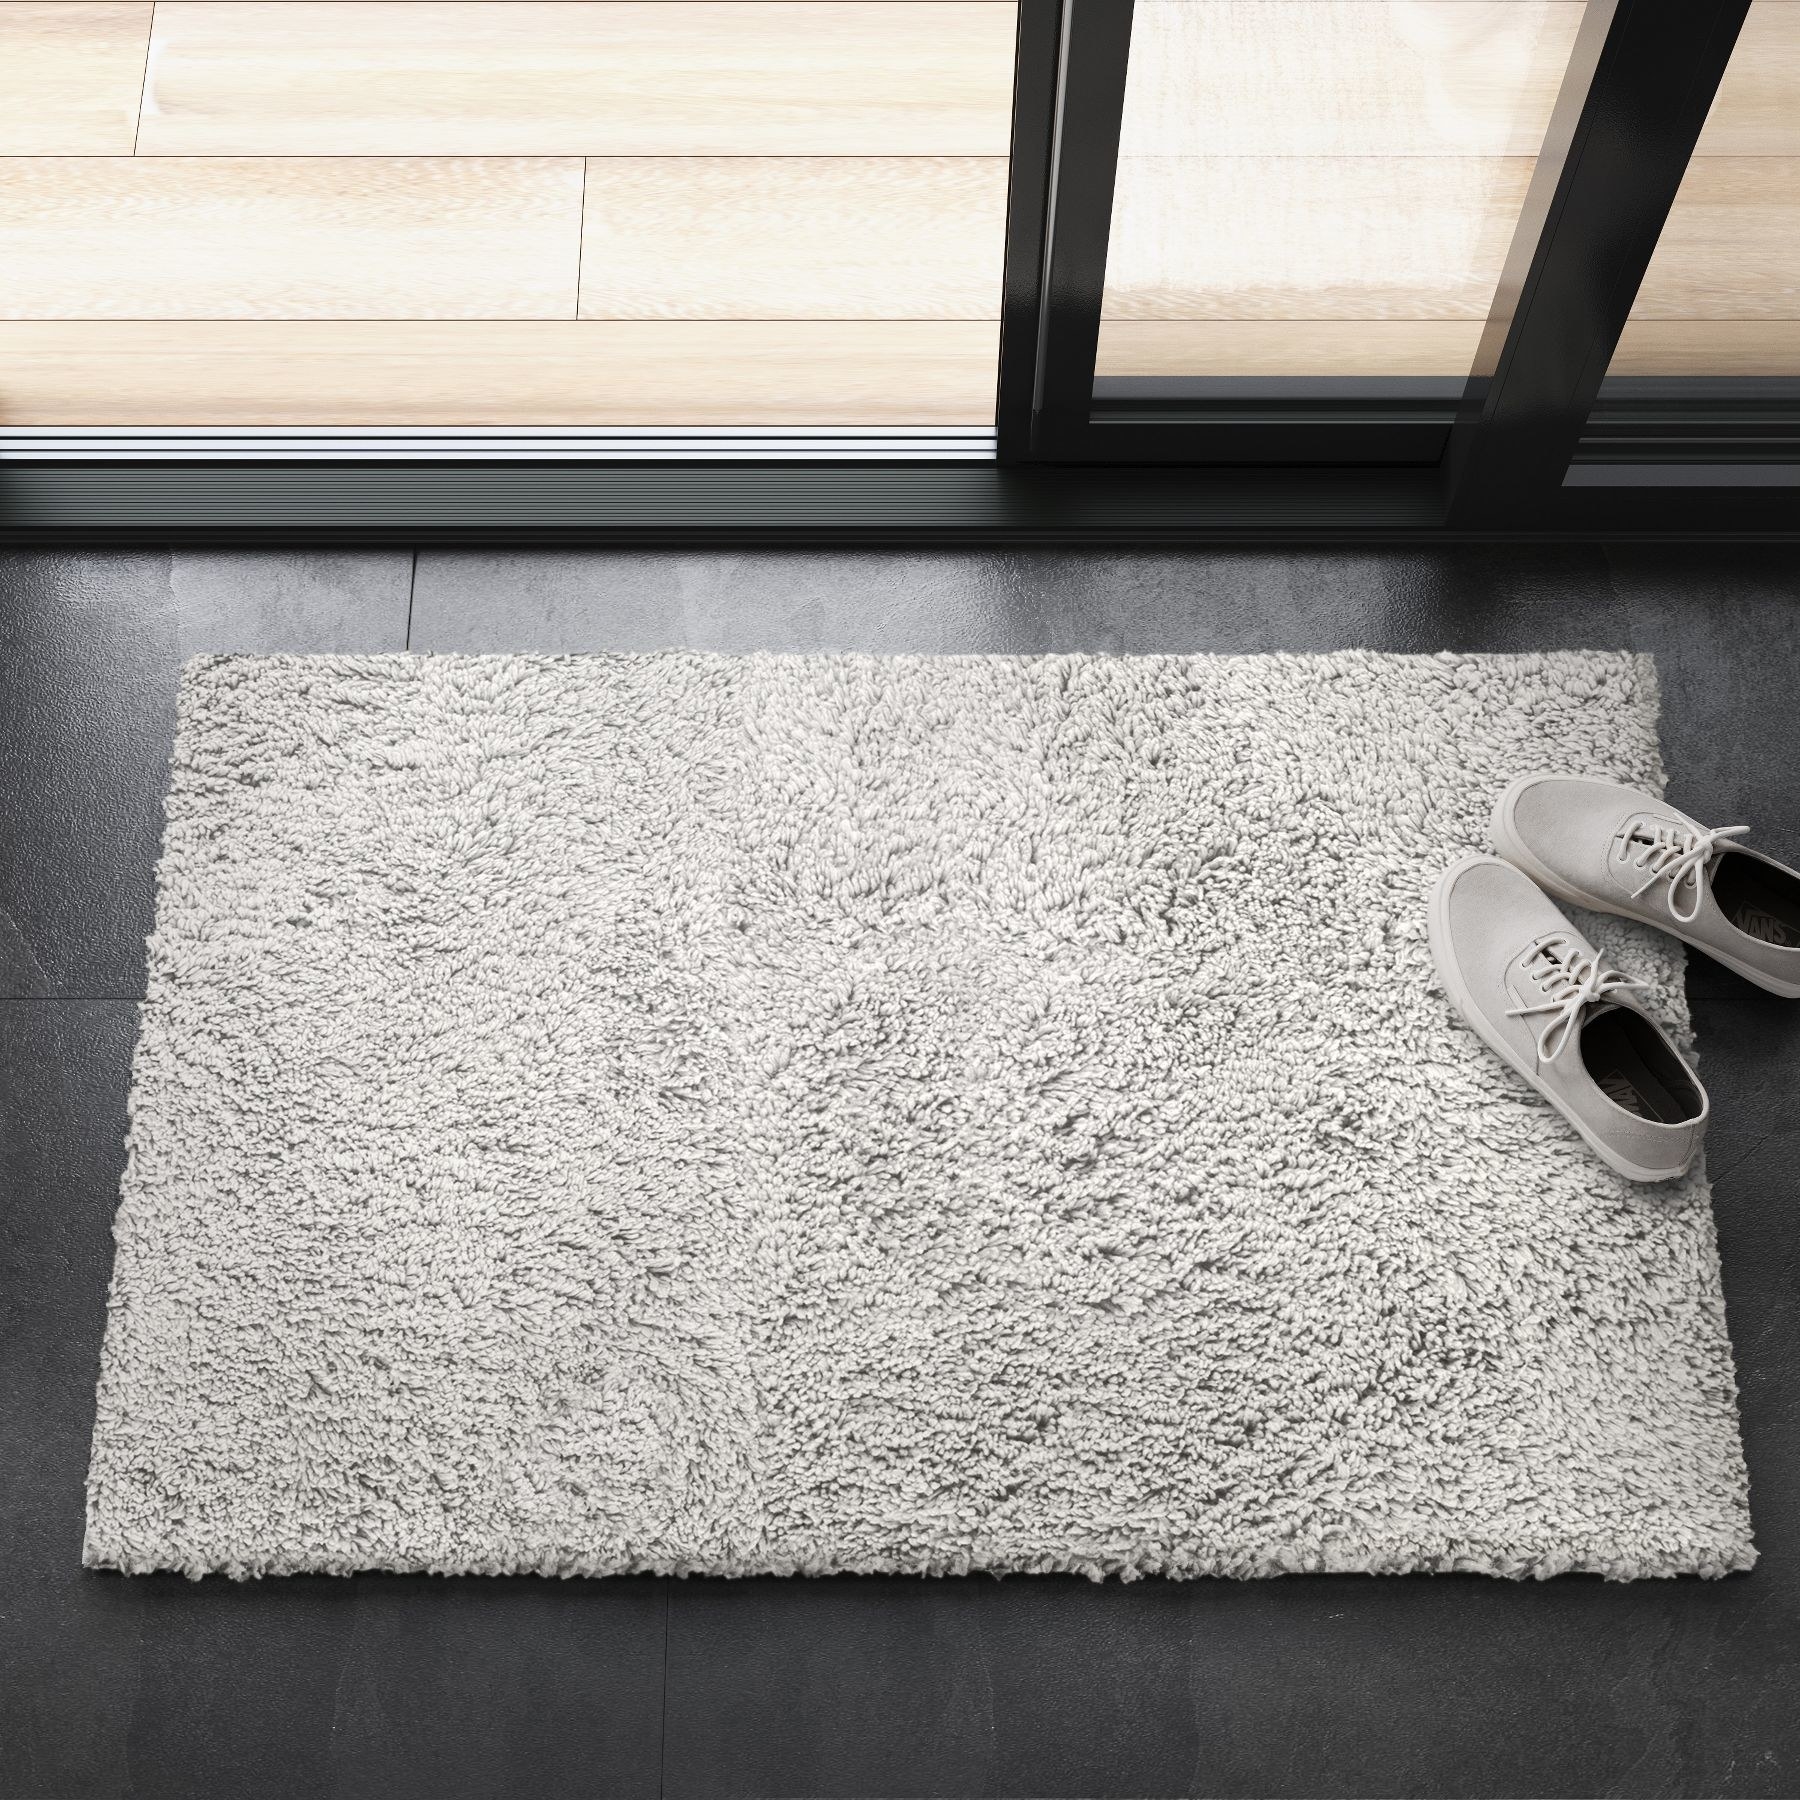 A gray rug with shoes on top